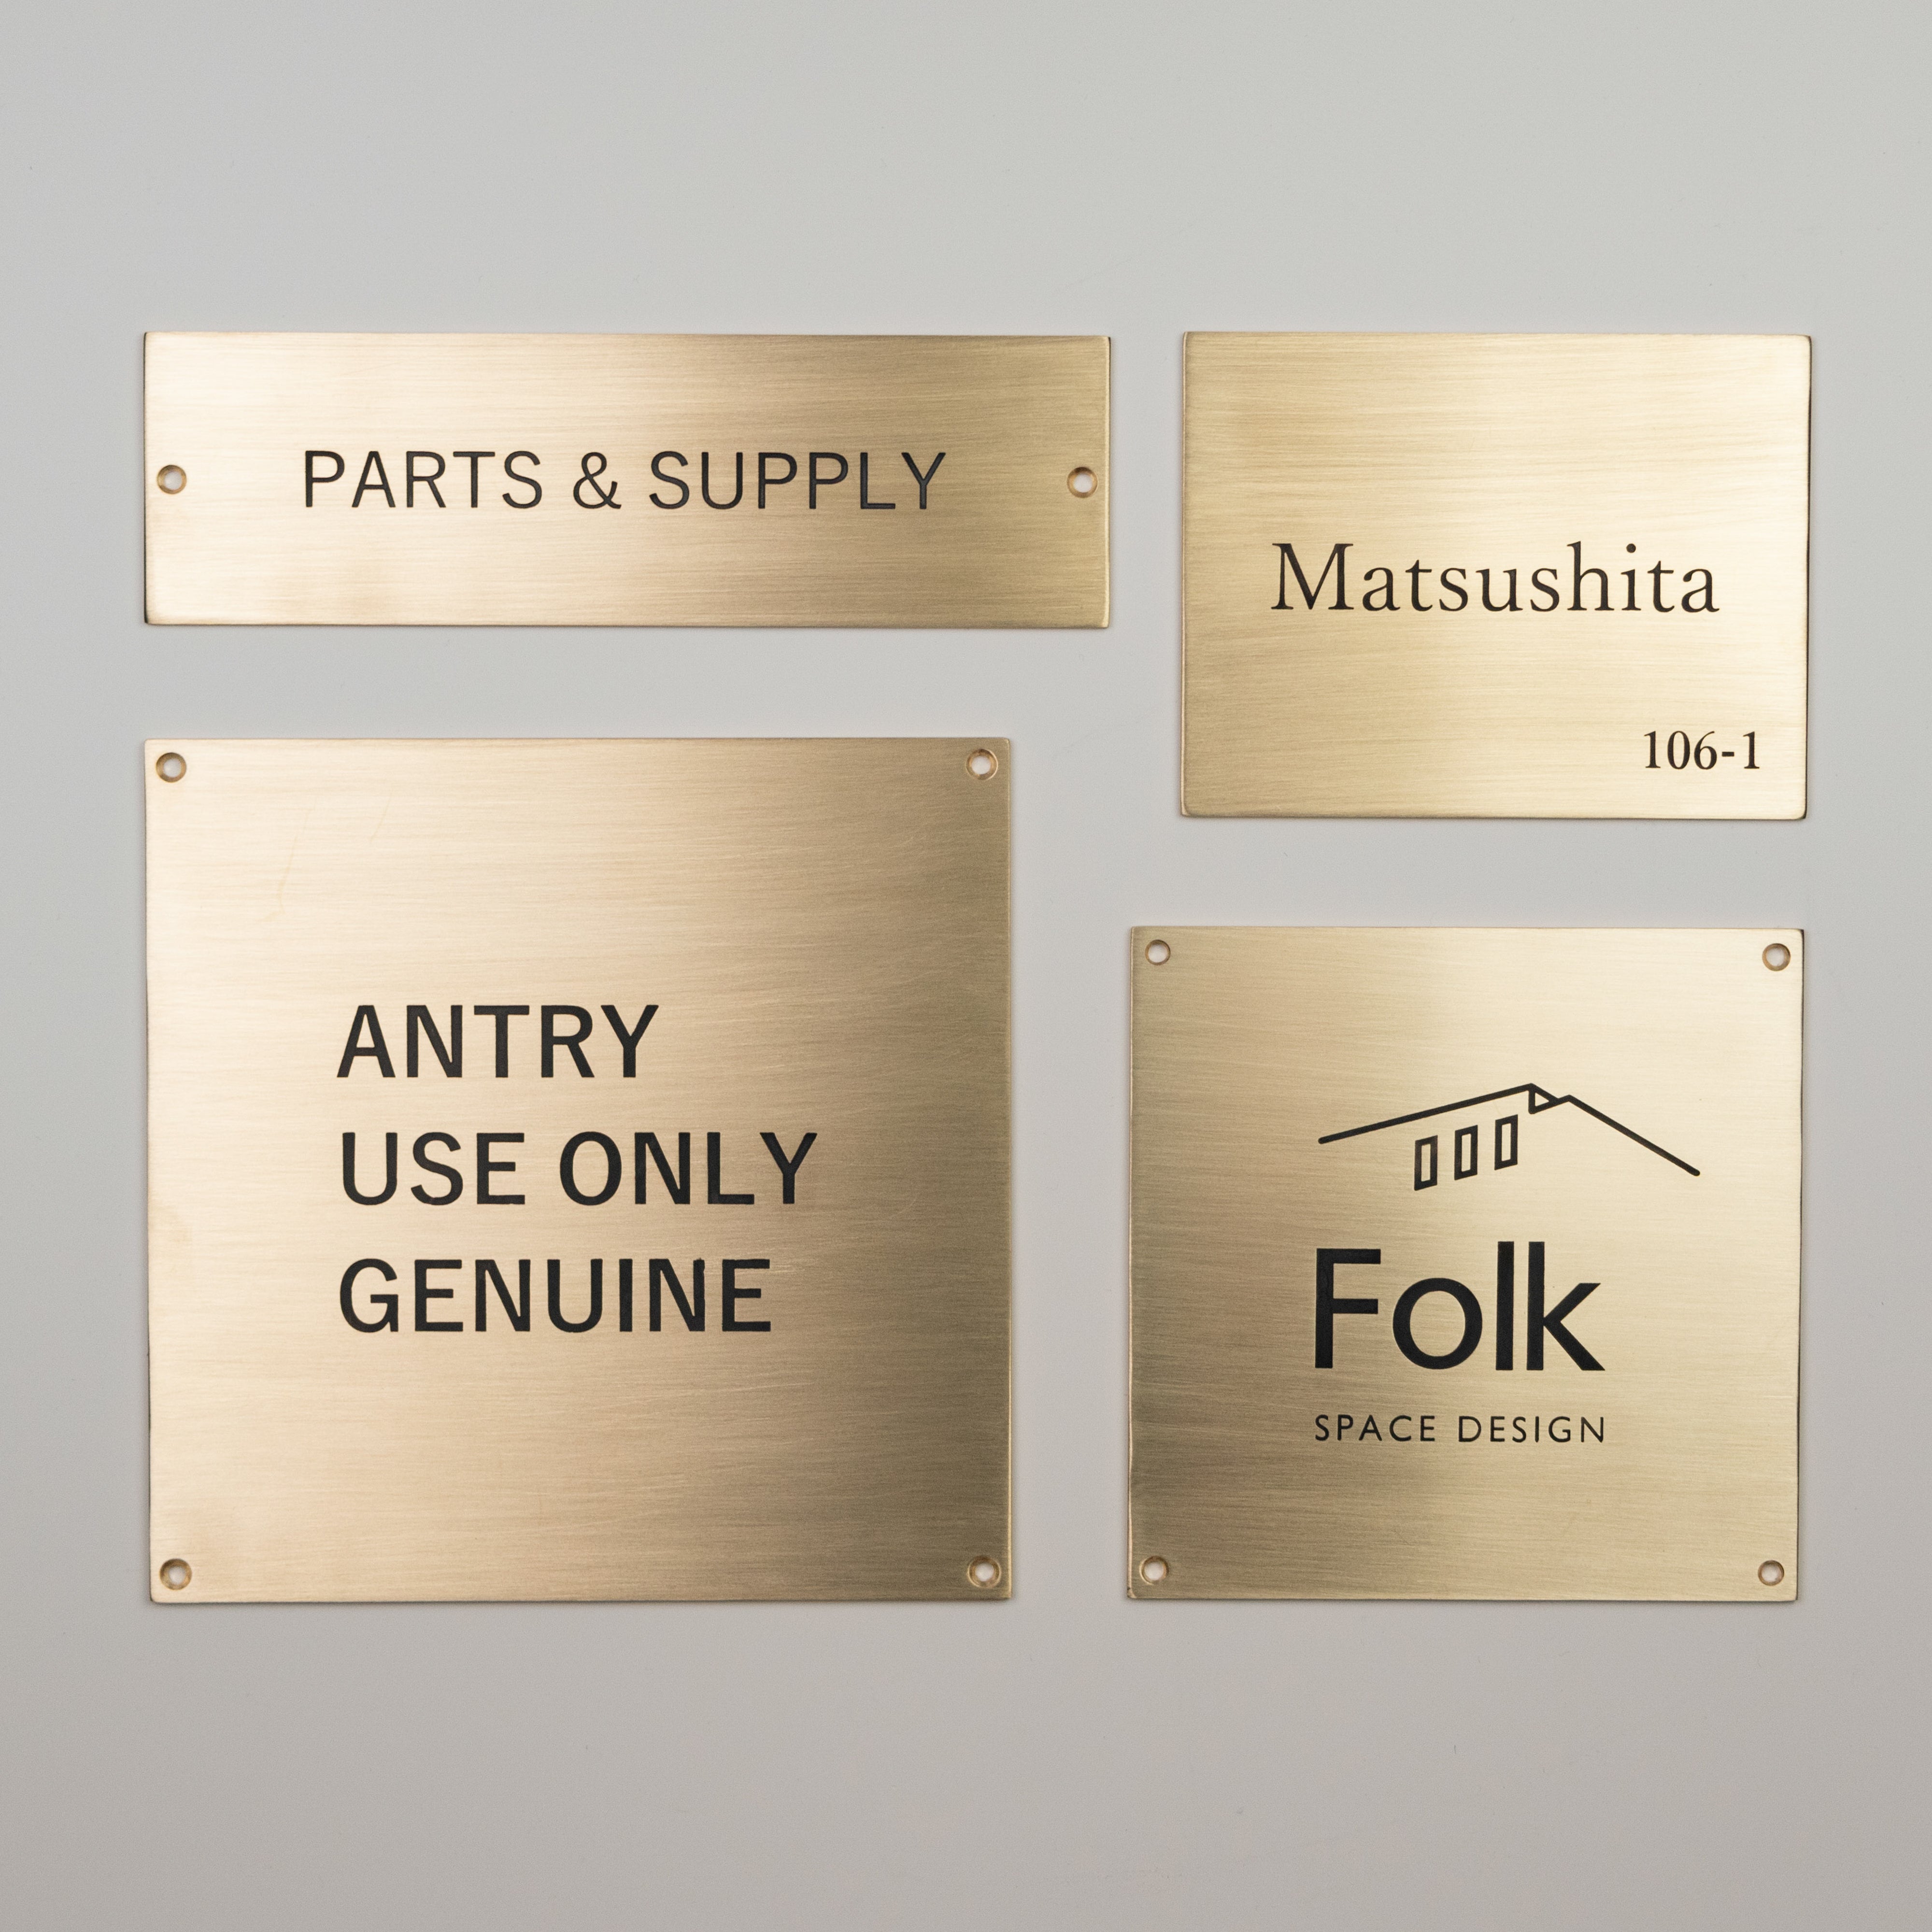 nameplate – PARTS & SUPPLY